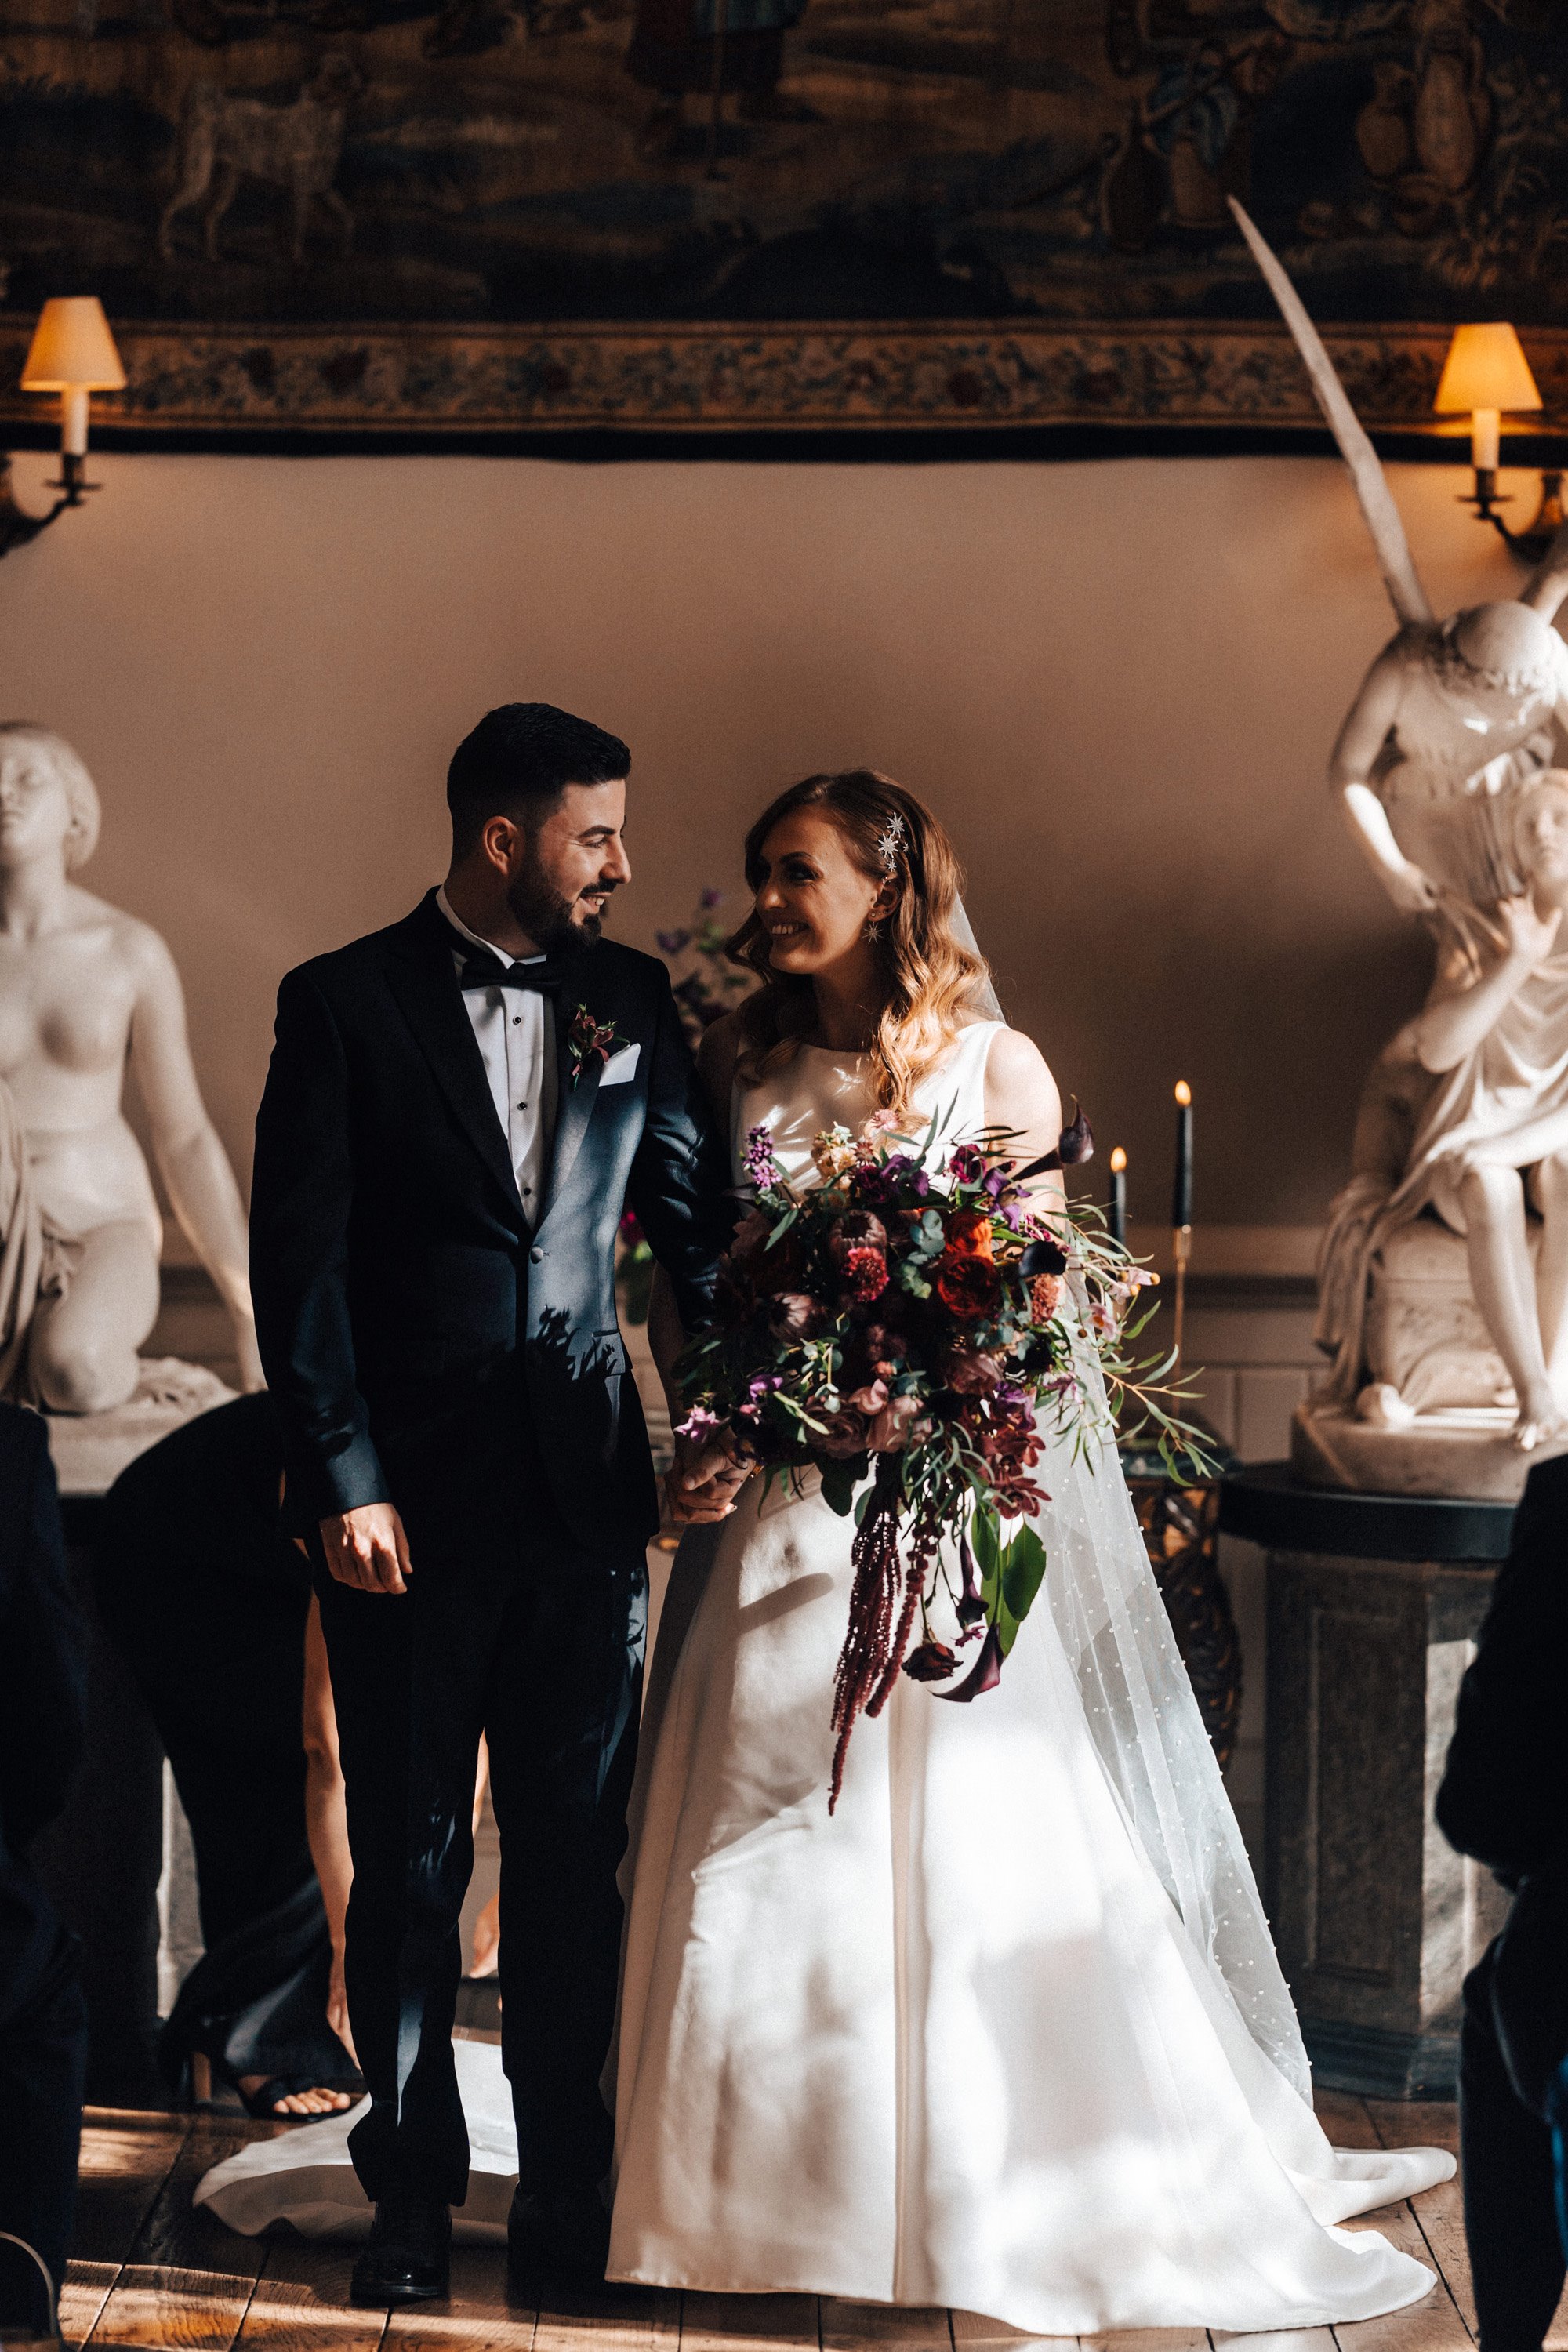 Bride and groom grin happily at each other at the end of a beautiful aisle with angel statues in a historic mansion house in the english countryside